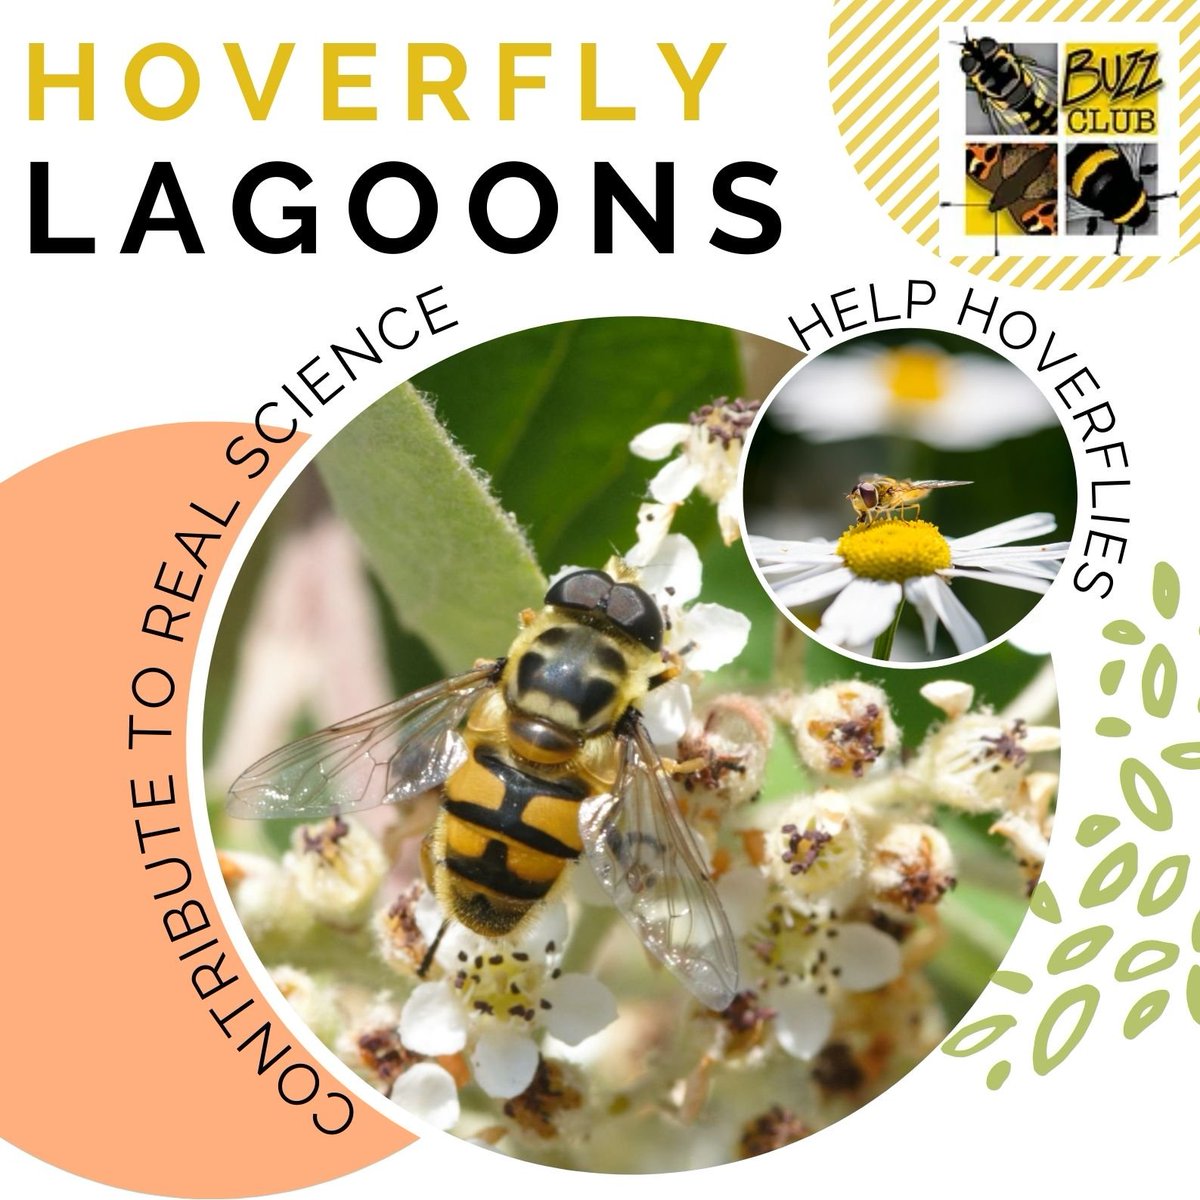 NEW PROJECT: Hoverfly Lagoons 2024 This year we want to know how ponds in gardens affect recruitment of hoverflies to Lagoons. If you don't have a pond don't worry - you can still take part! Find out more & sign up here: thebuzzclub.uk/hoverfly-lagoo… @HoverflyLagoons @EllenRotheray